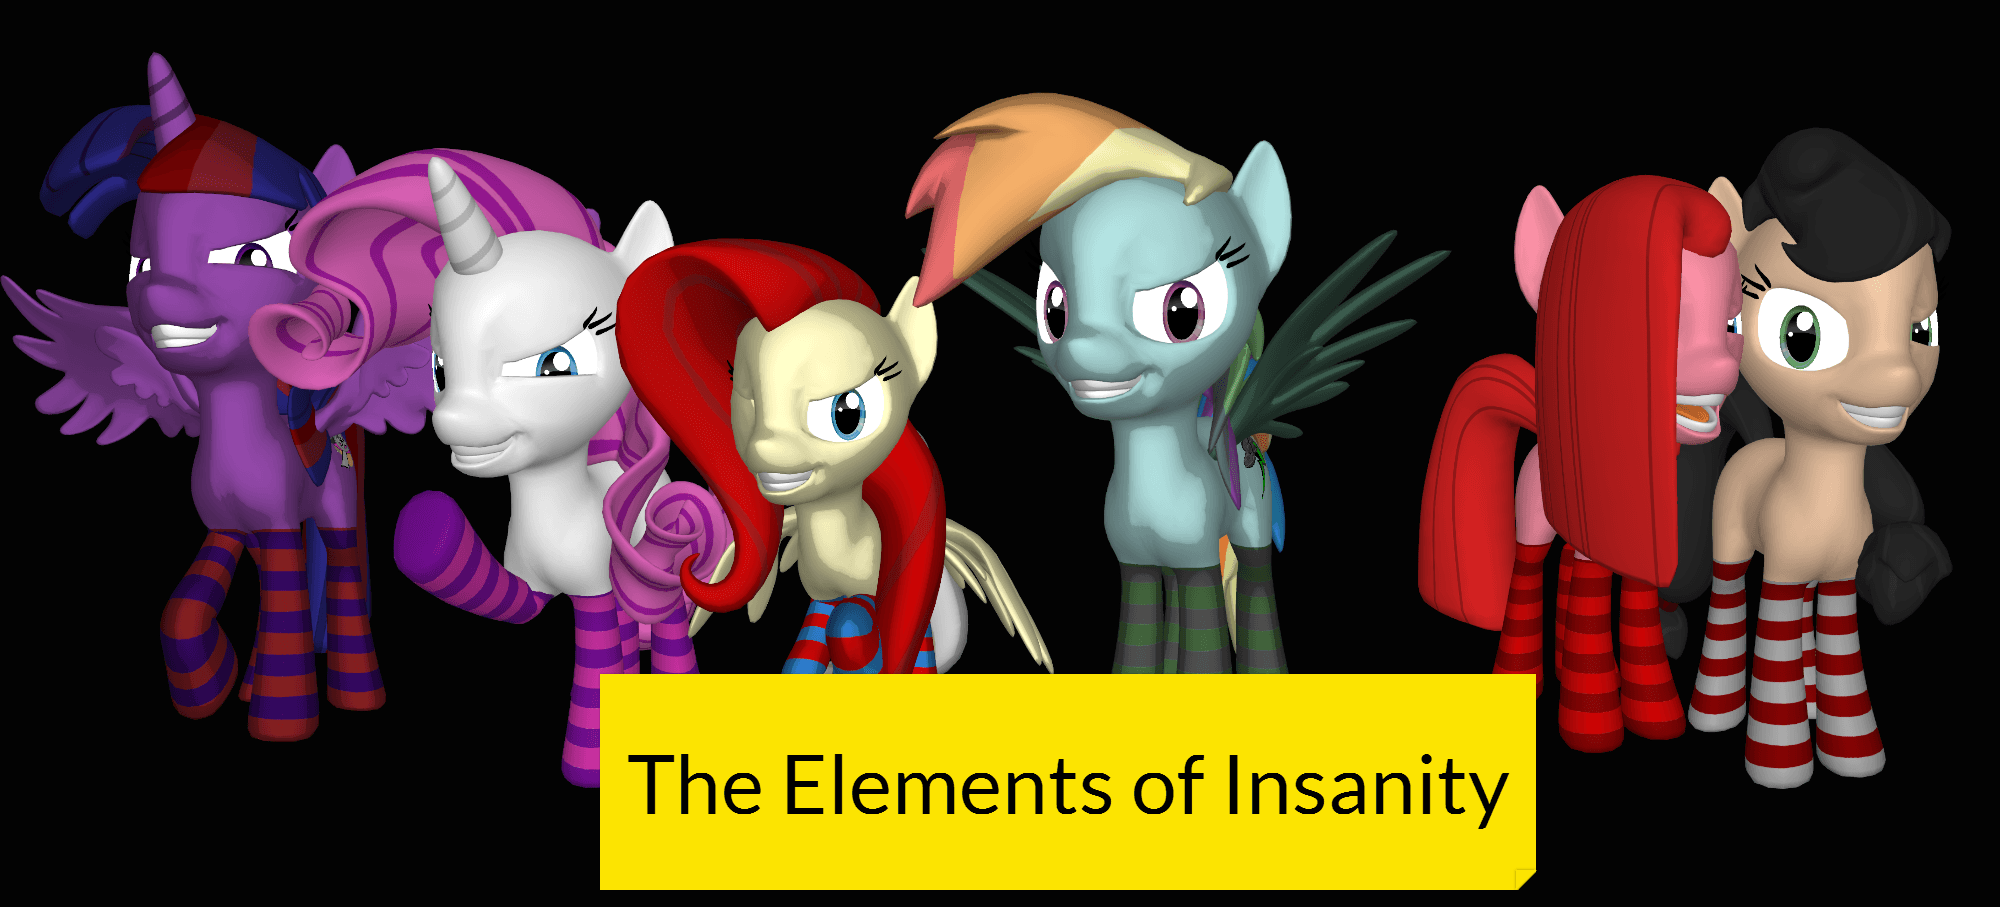 The Elements Of Insanity Poster Wallpaper